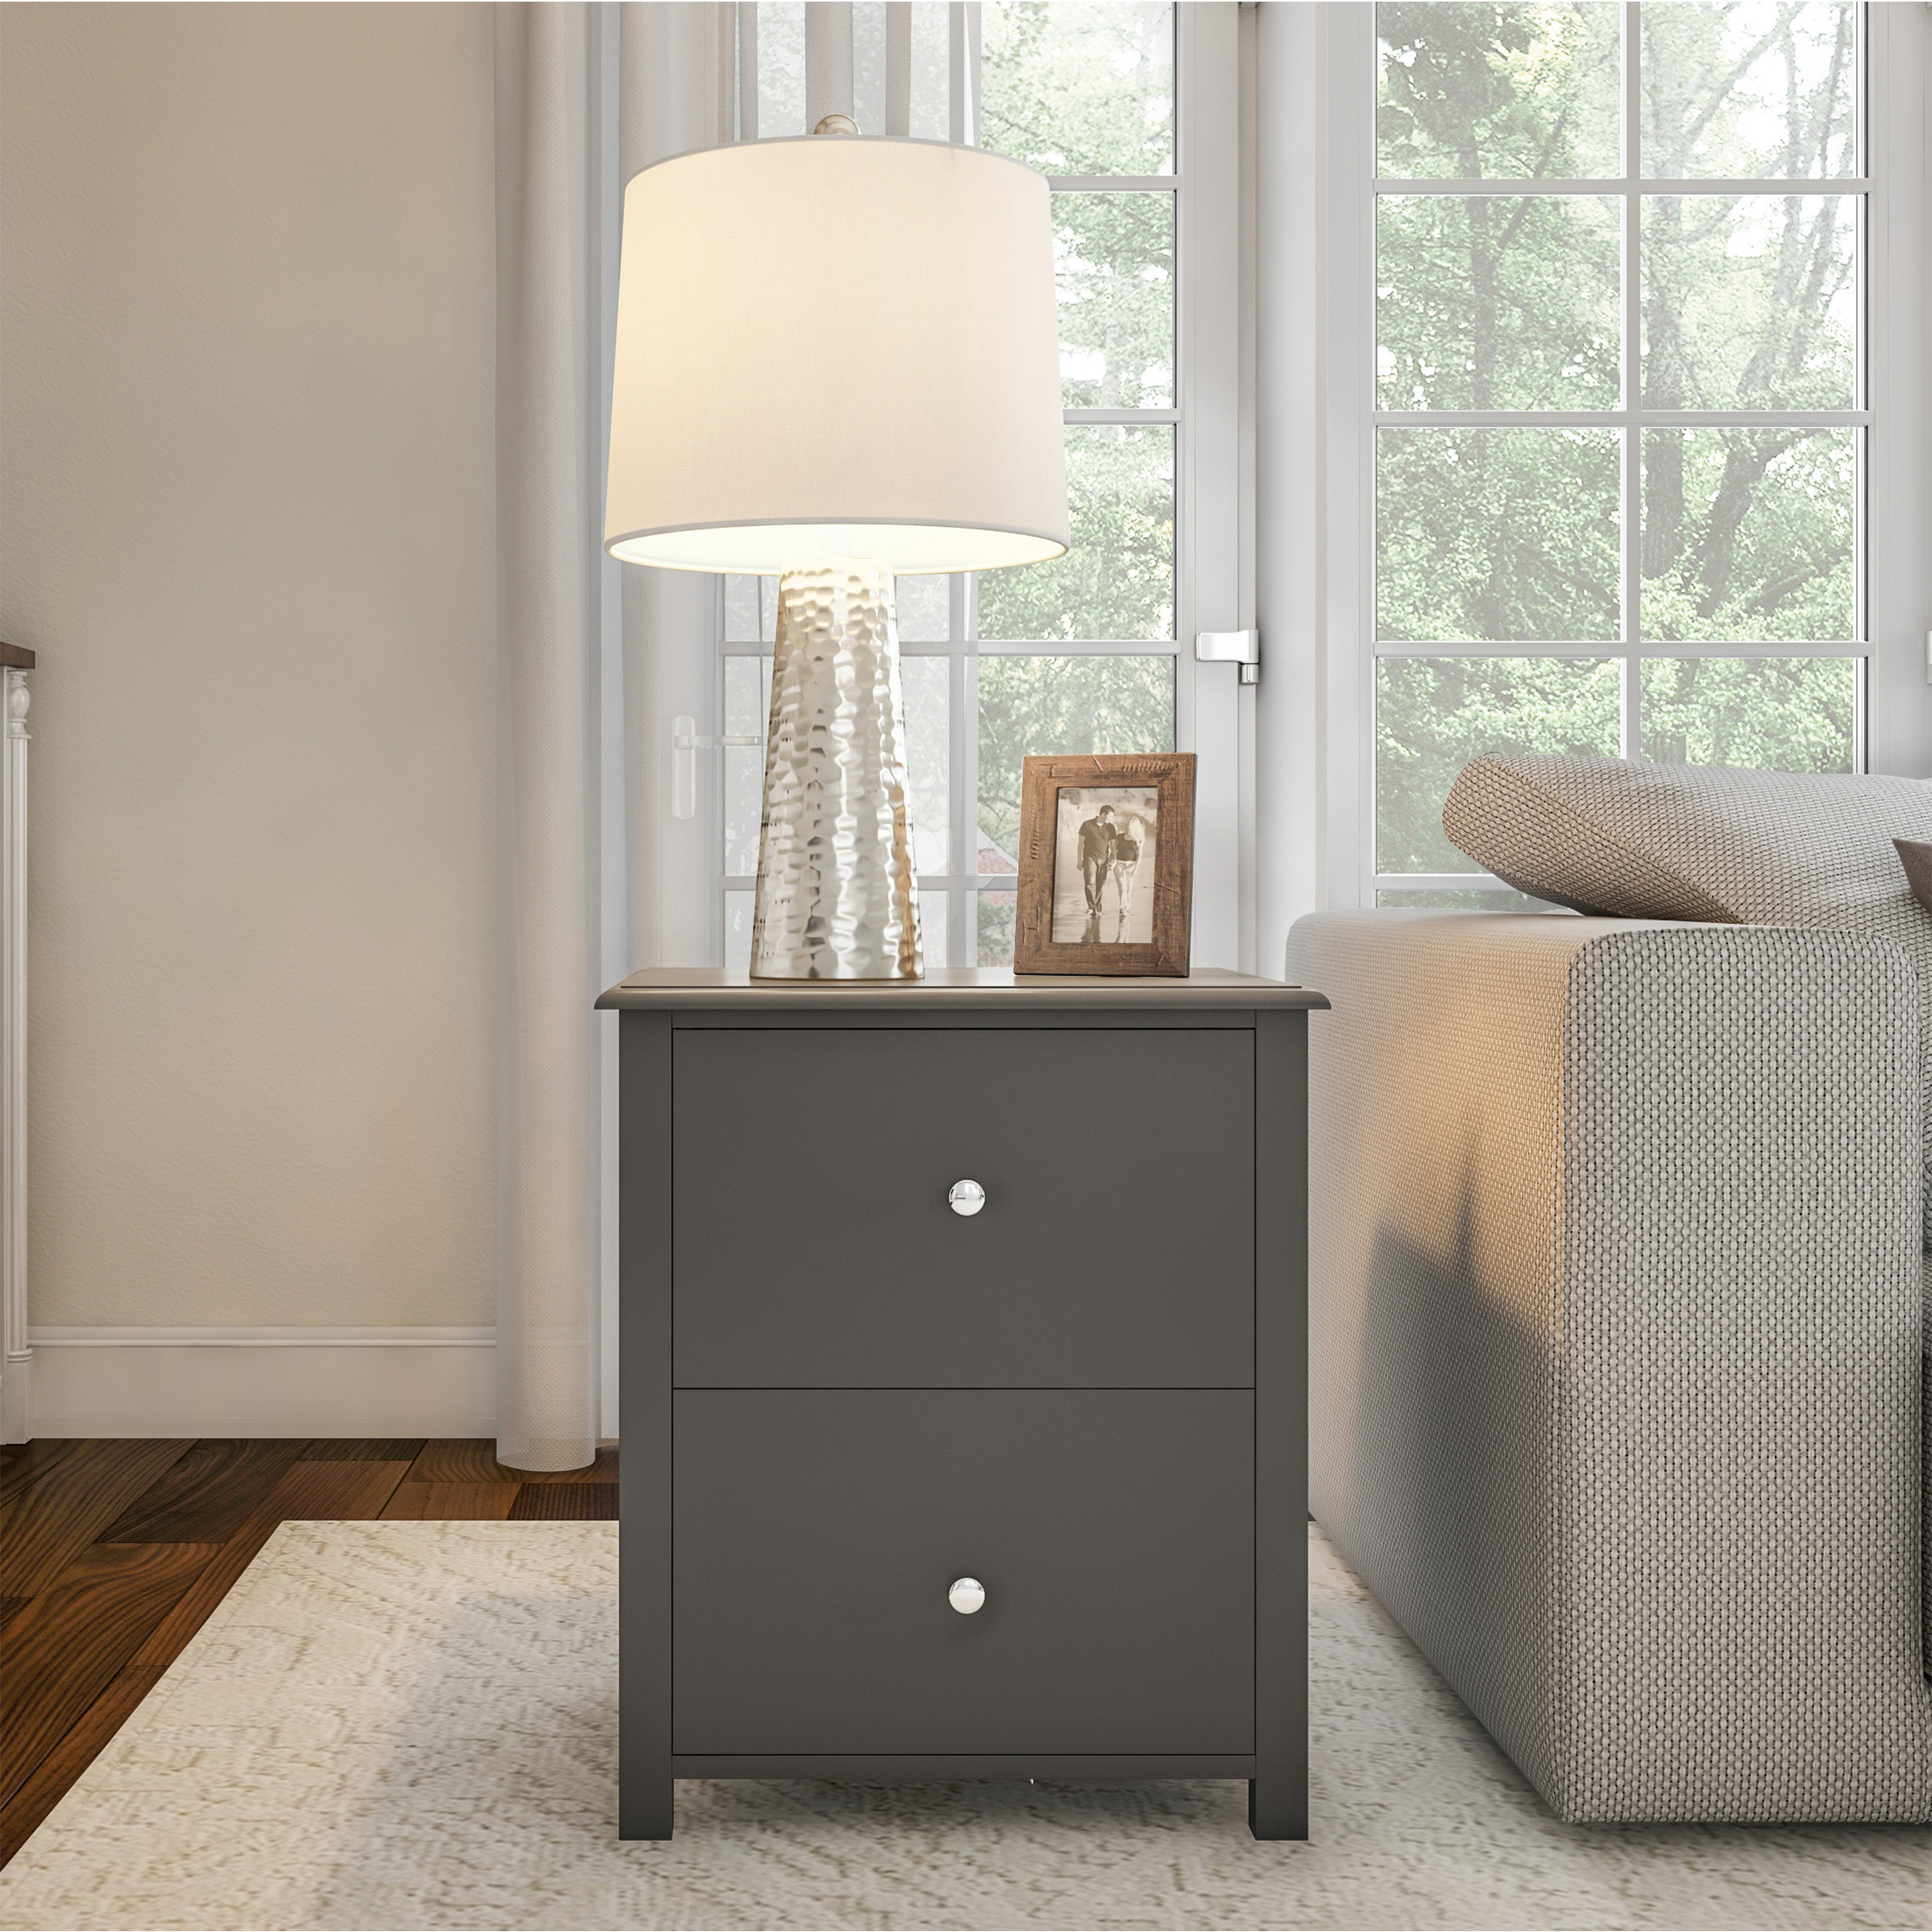 End Table With 2 Drawers-Sofa Side Table-Slate Gray & Silver Pull Knobs-Traditional Style Wooden Nightstand